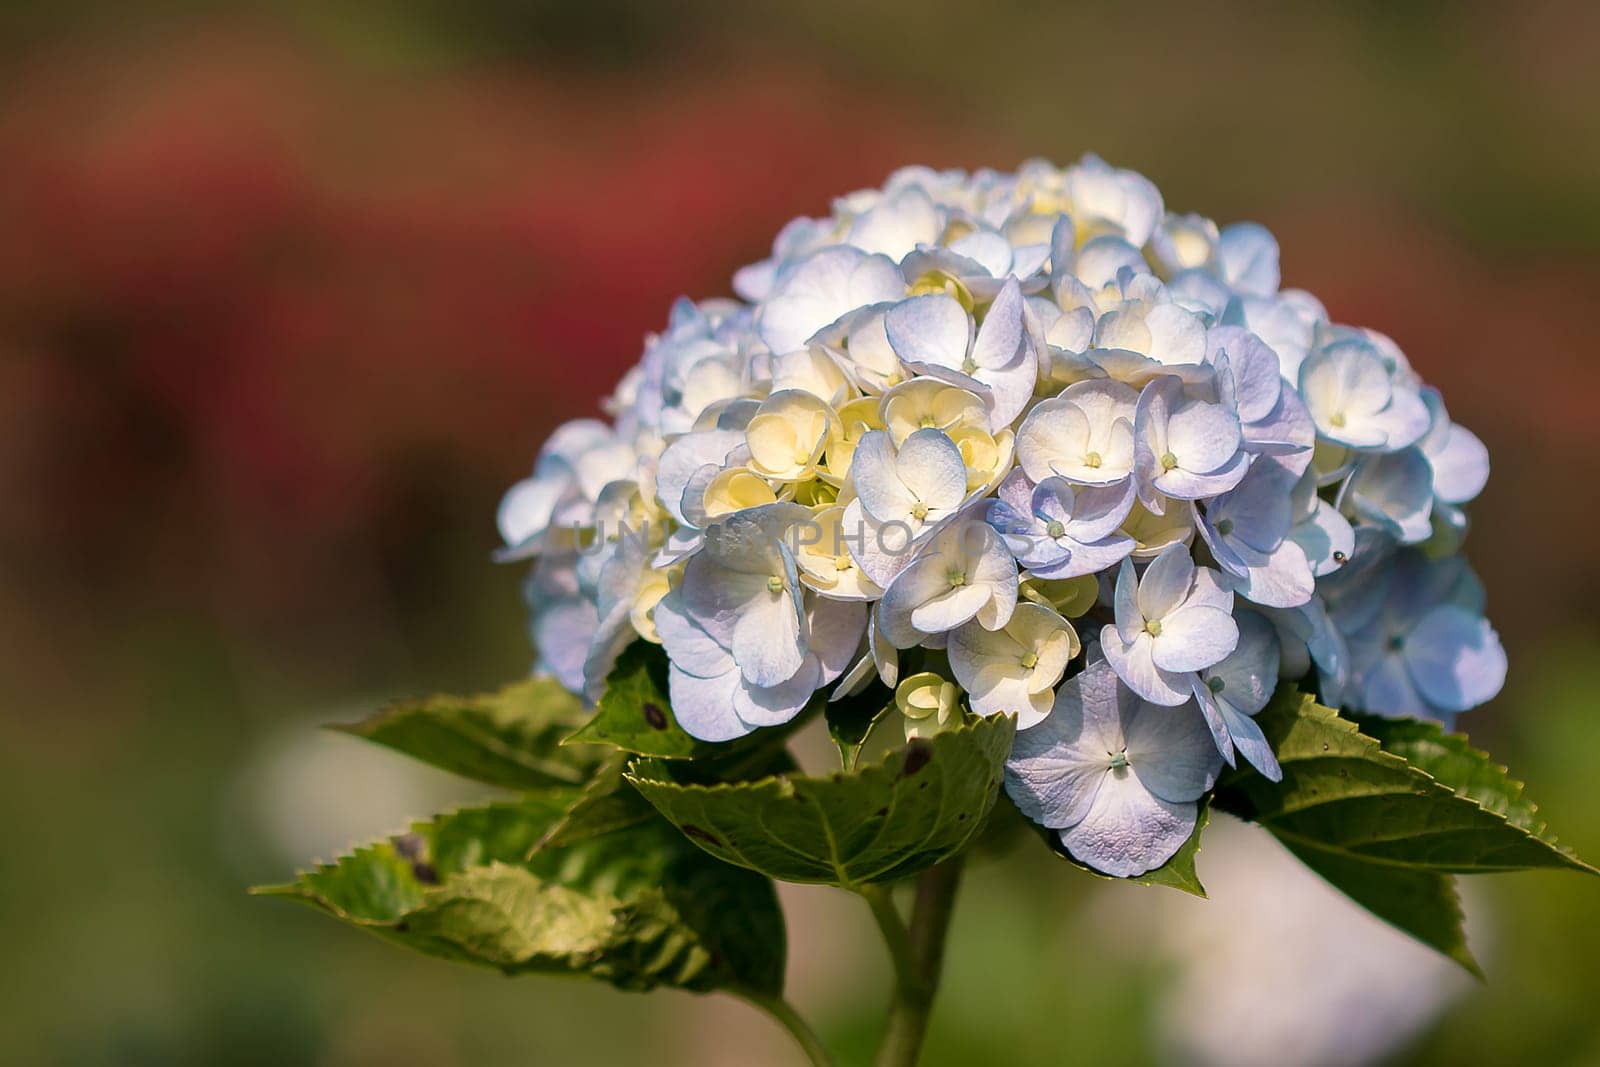 Hydrangea, yellow, mixed with purple, is blooming beautifully in the garden.